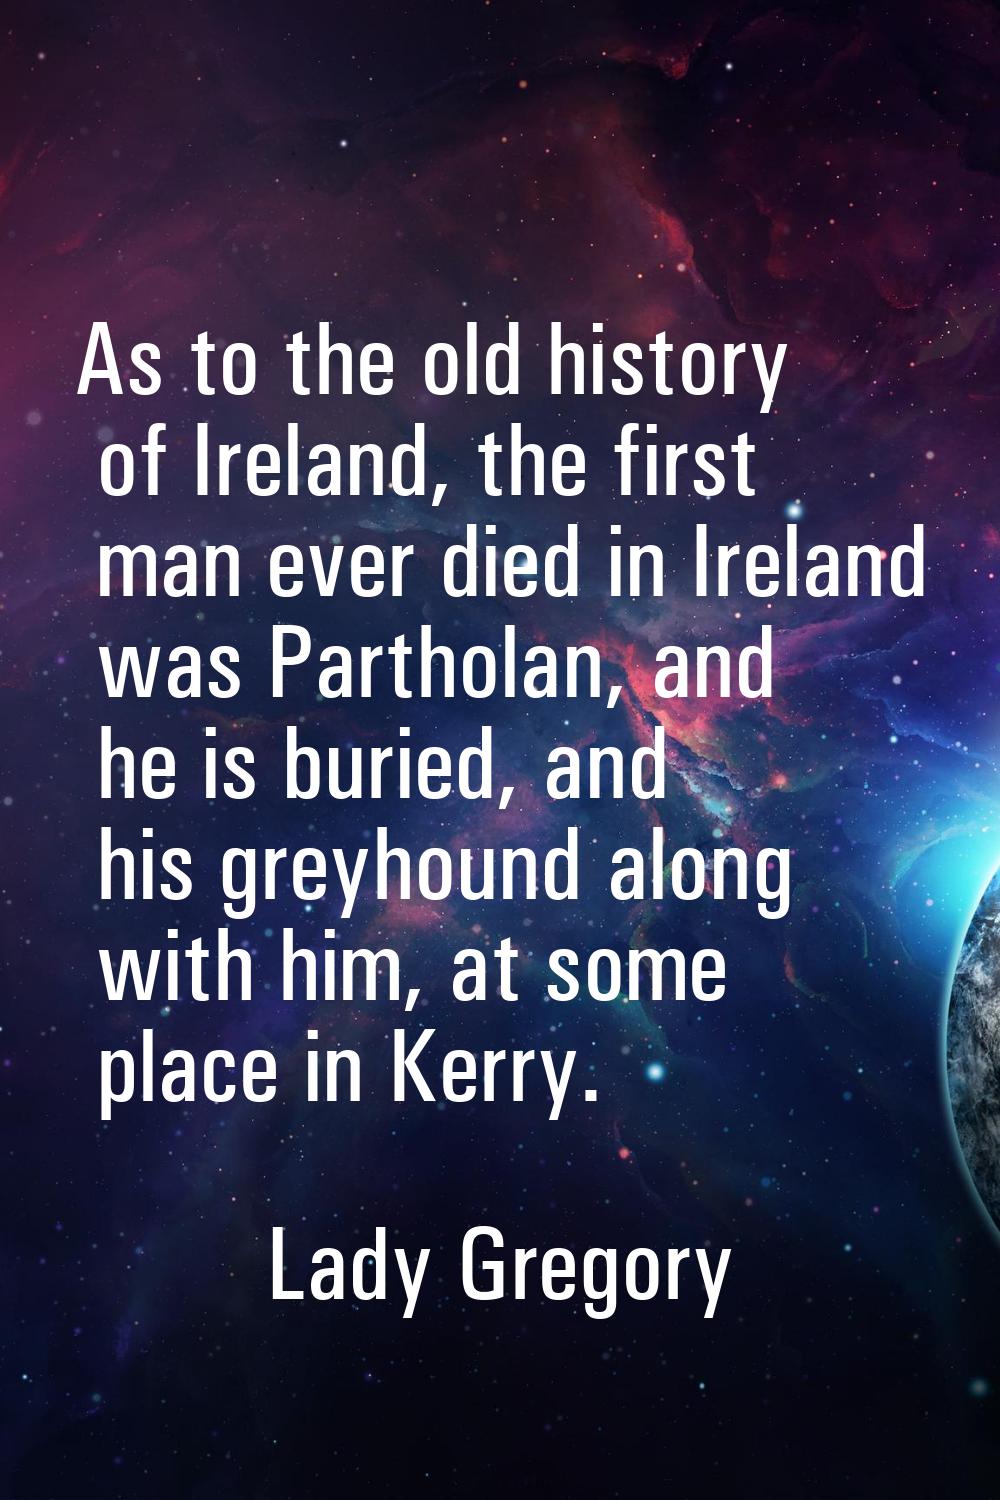 As to the old history of Ireland, the first man ever died in Ireland was Partholan, and he is burie